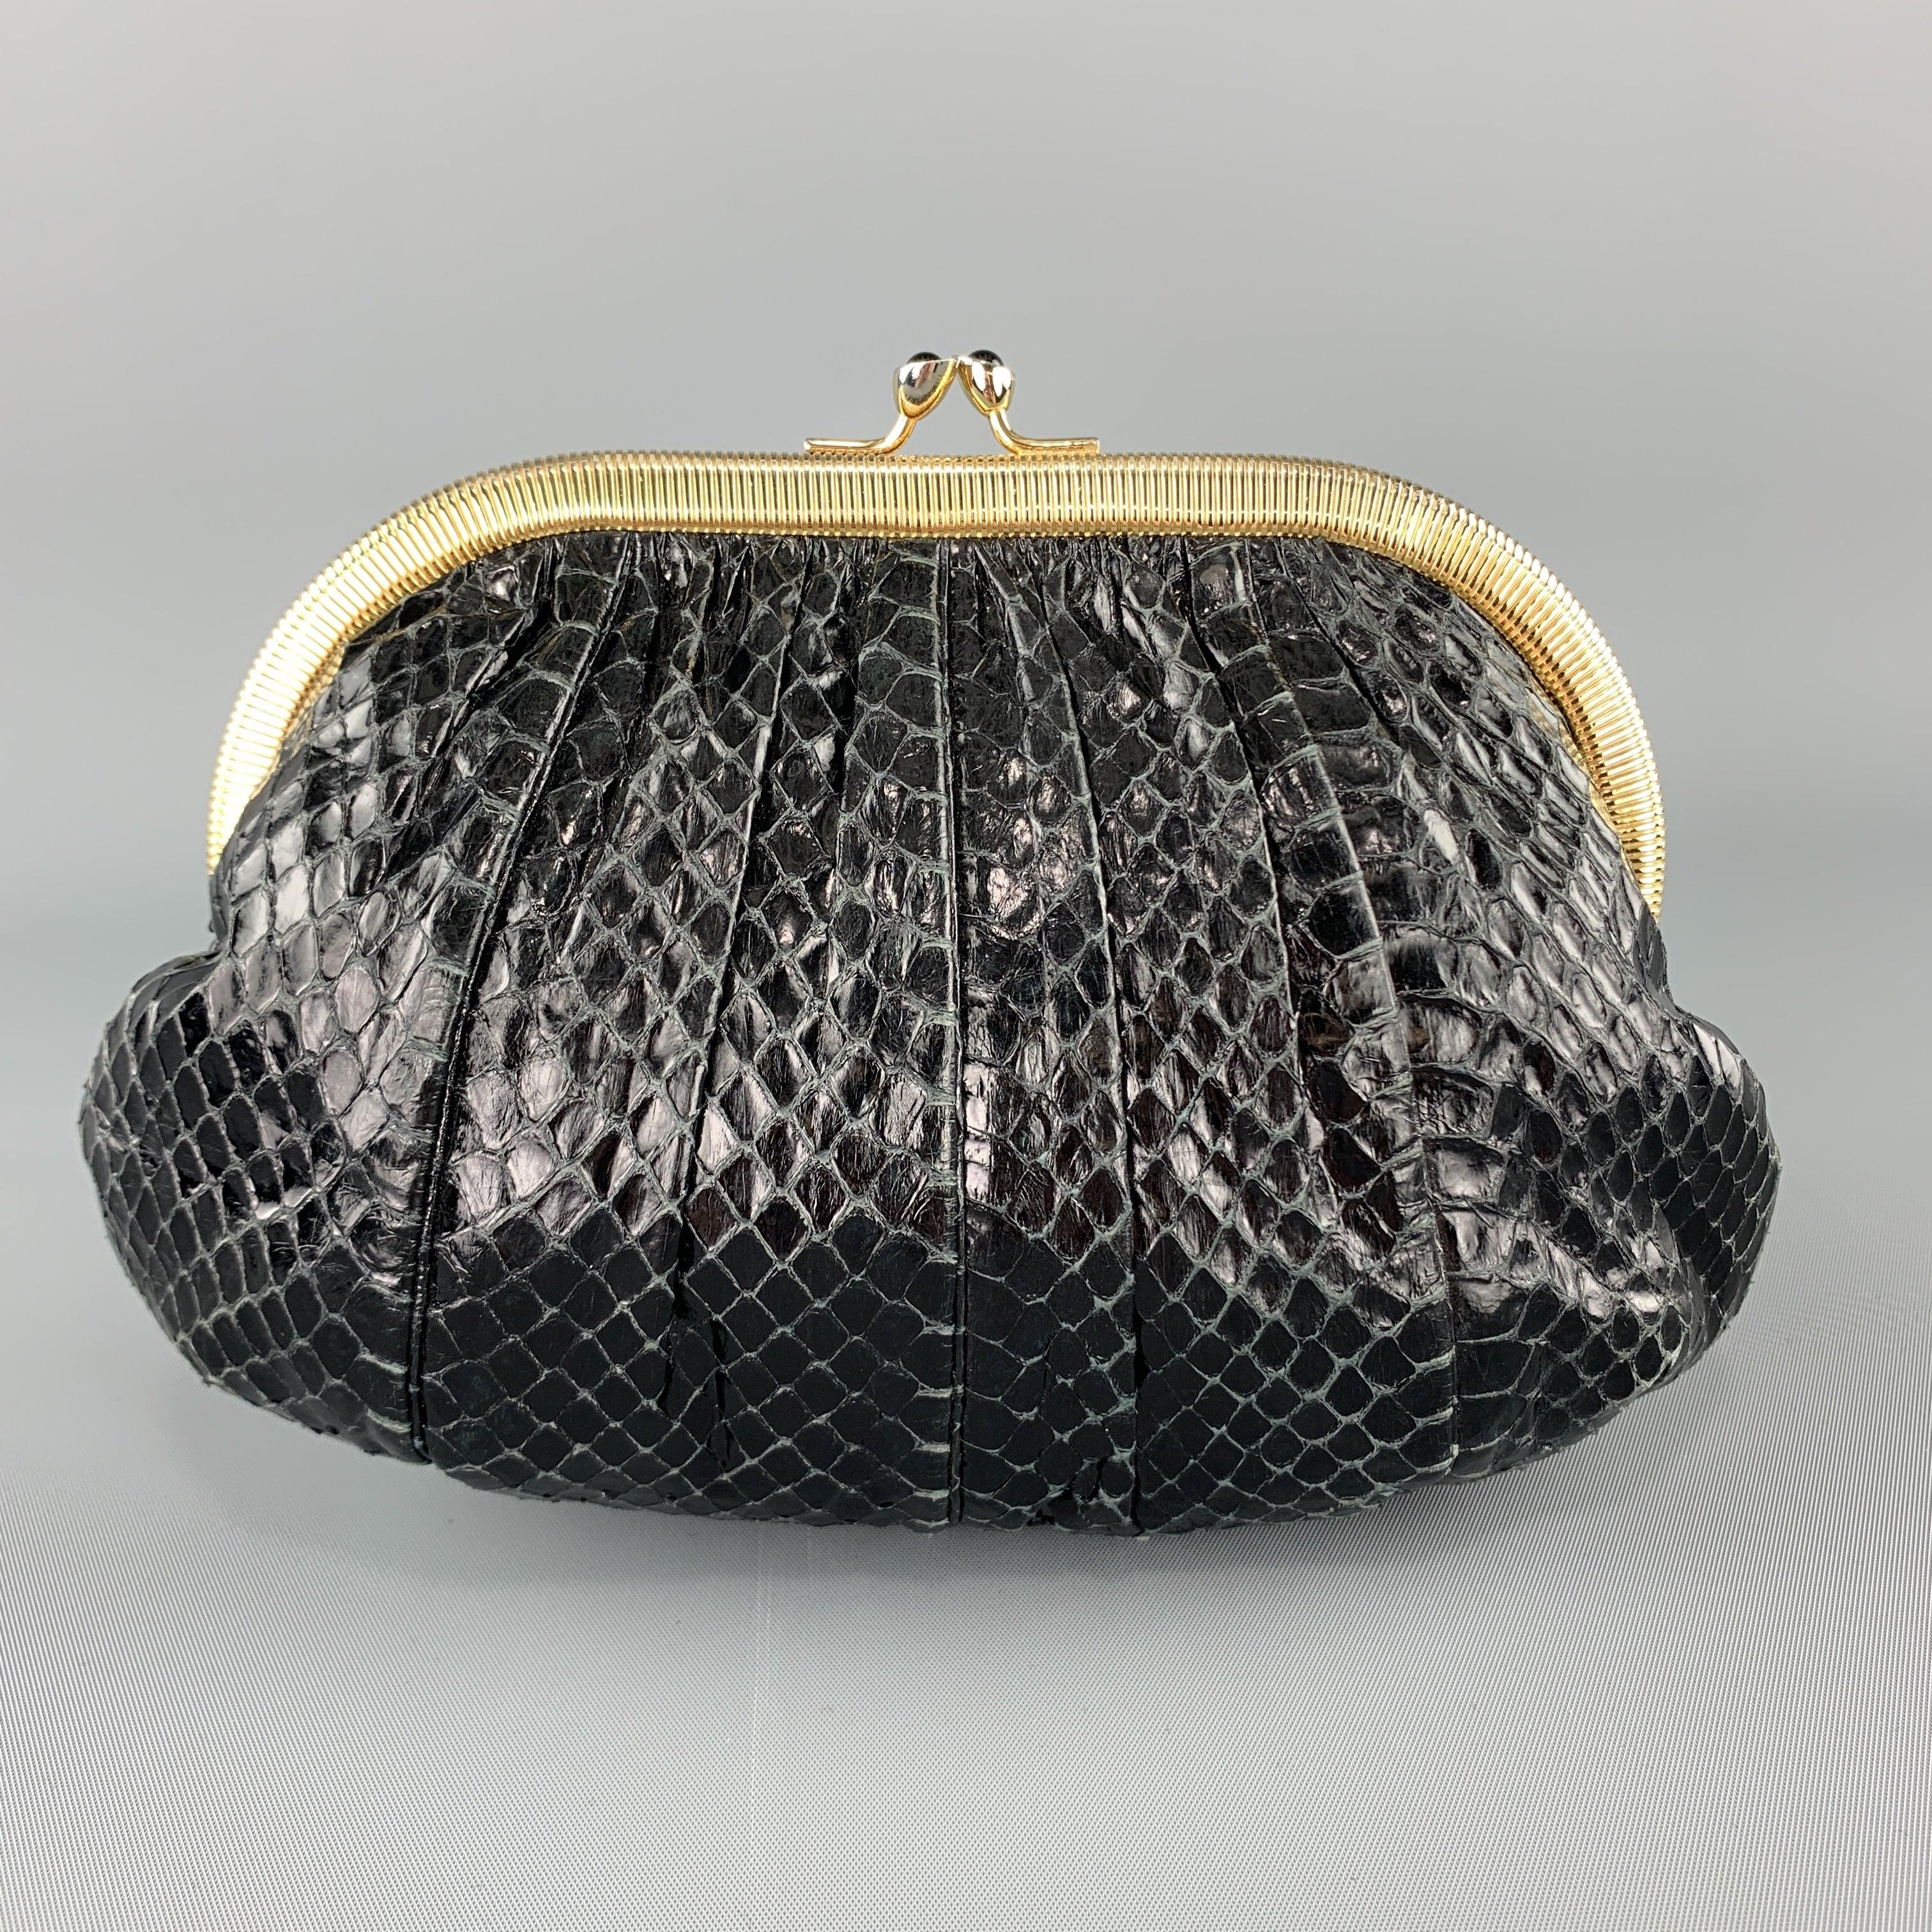 JUDITH LEIBER Ruched Black Snake Skin Evening Clutch Handbag In Excellent Condition For Sale In San Francisco, CA